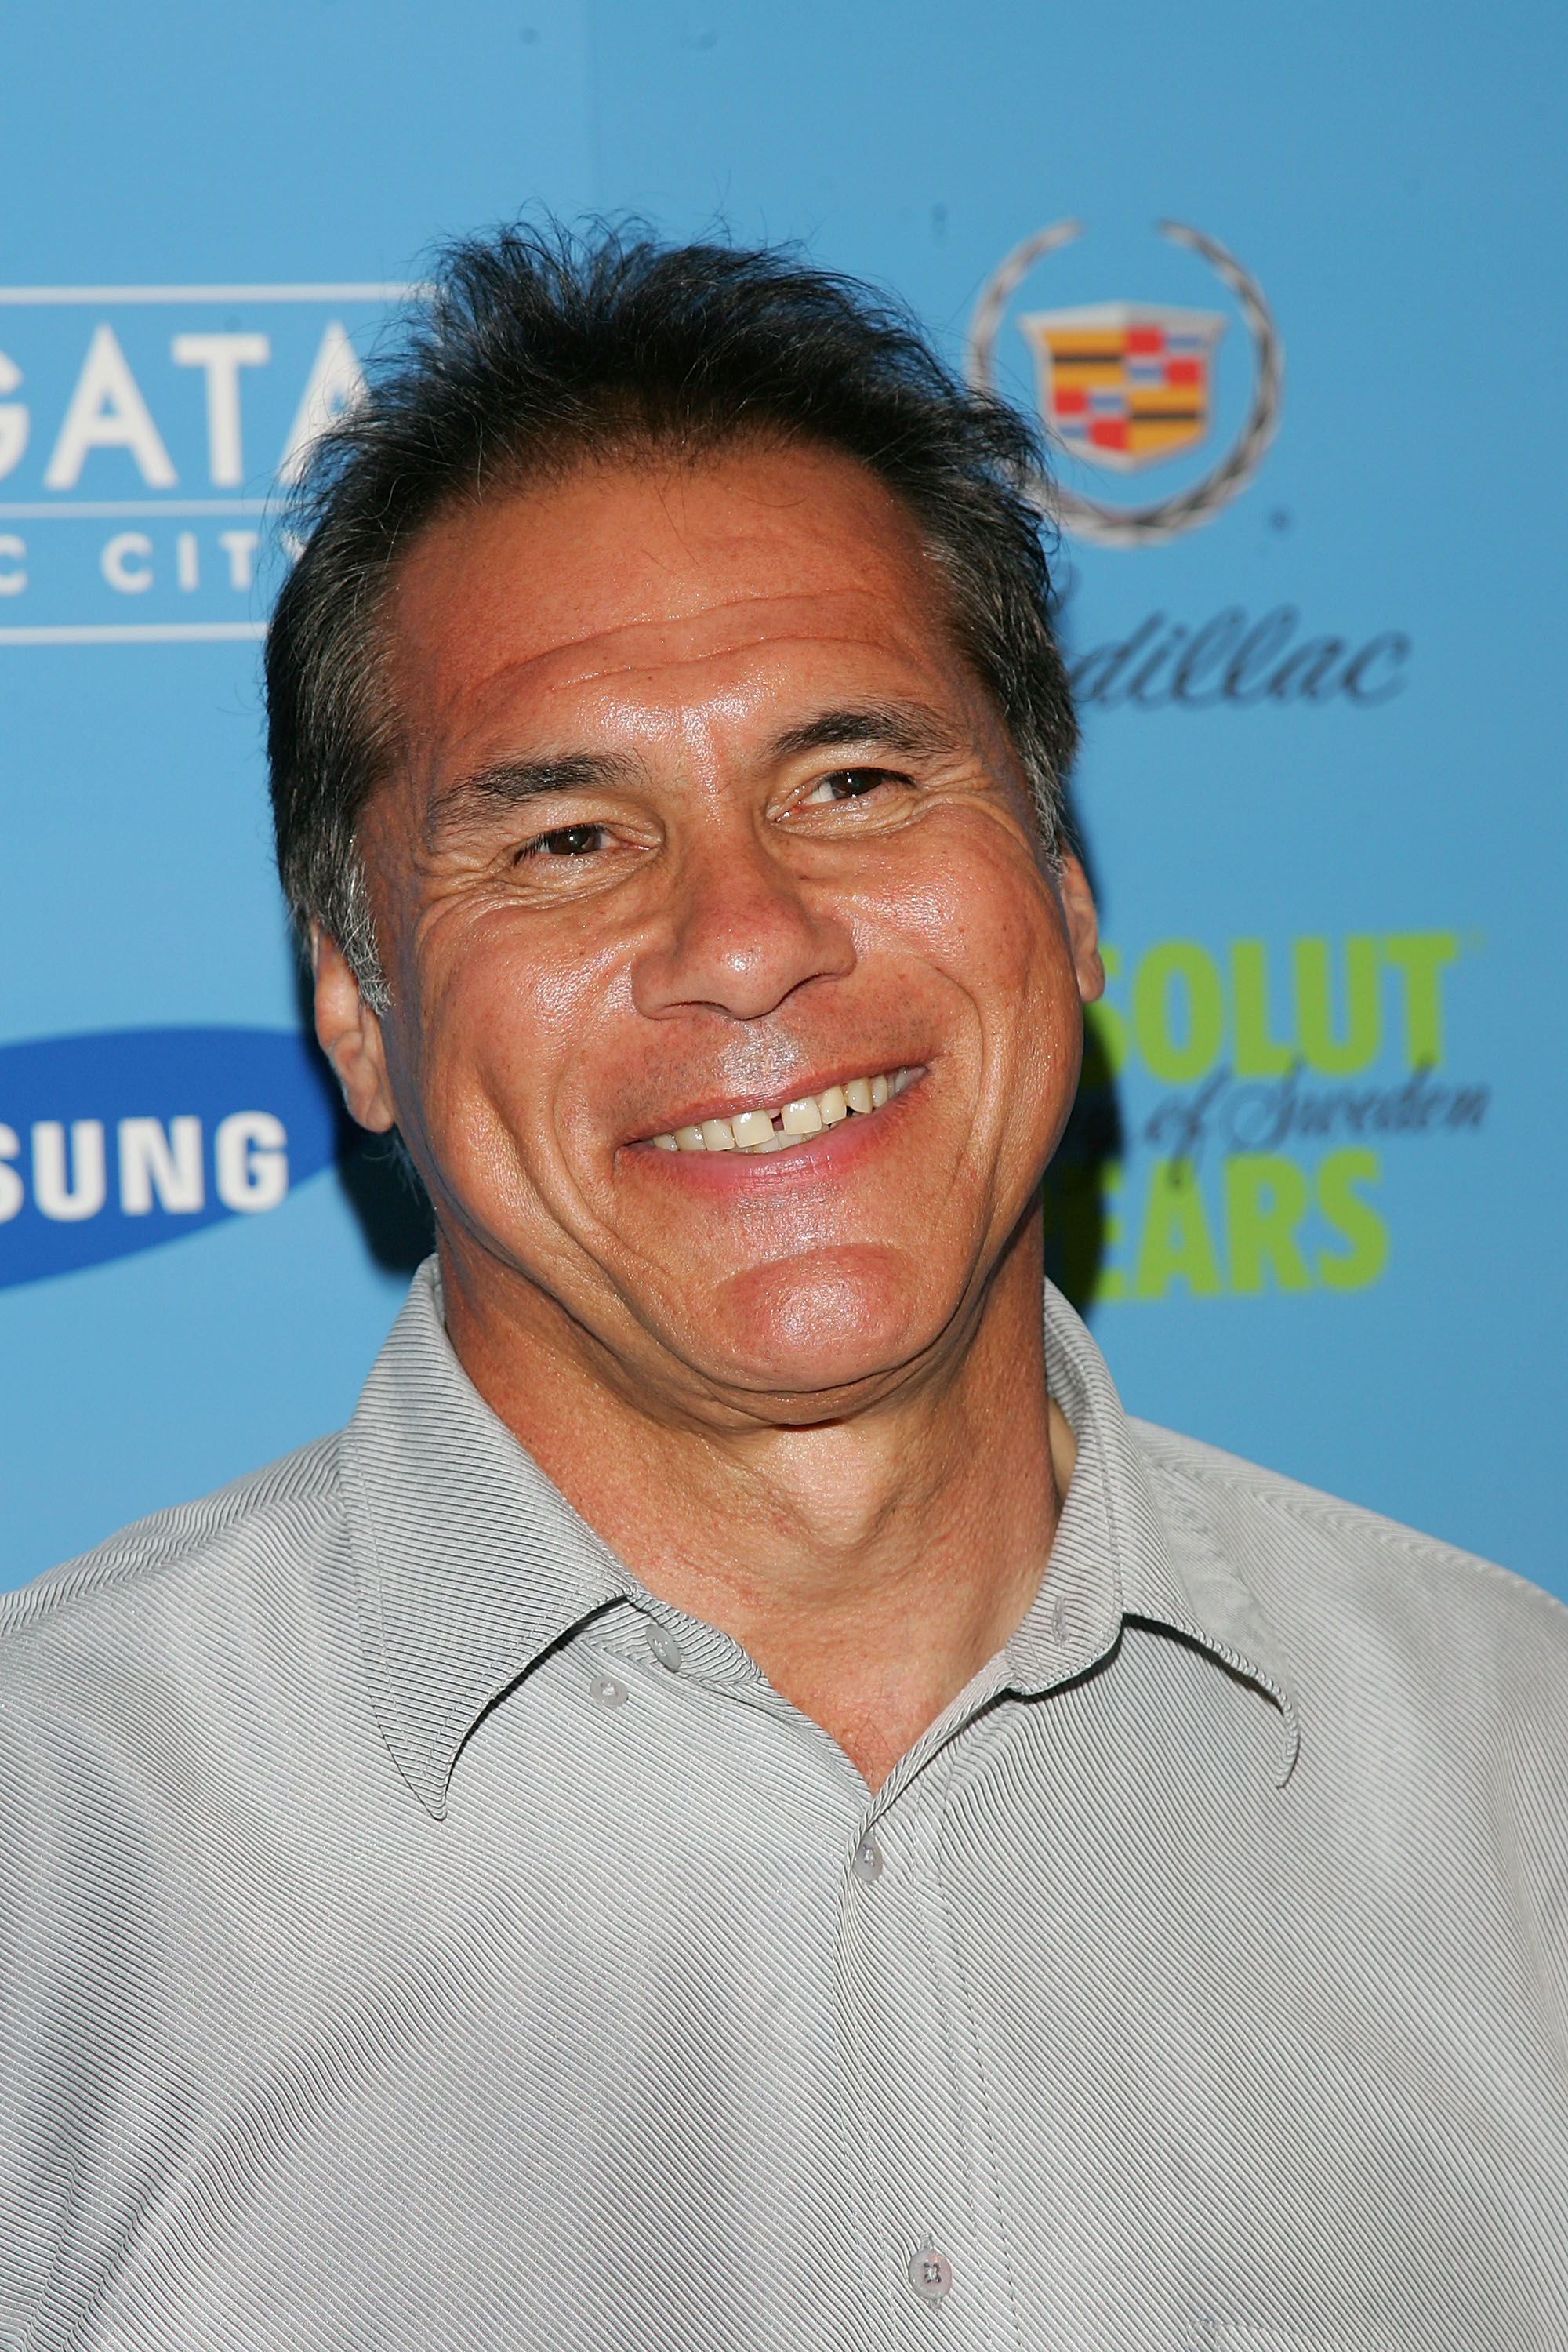 Jim Plunkett Went On To Win Two Super Bowl Titles With Oakland